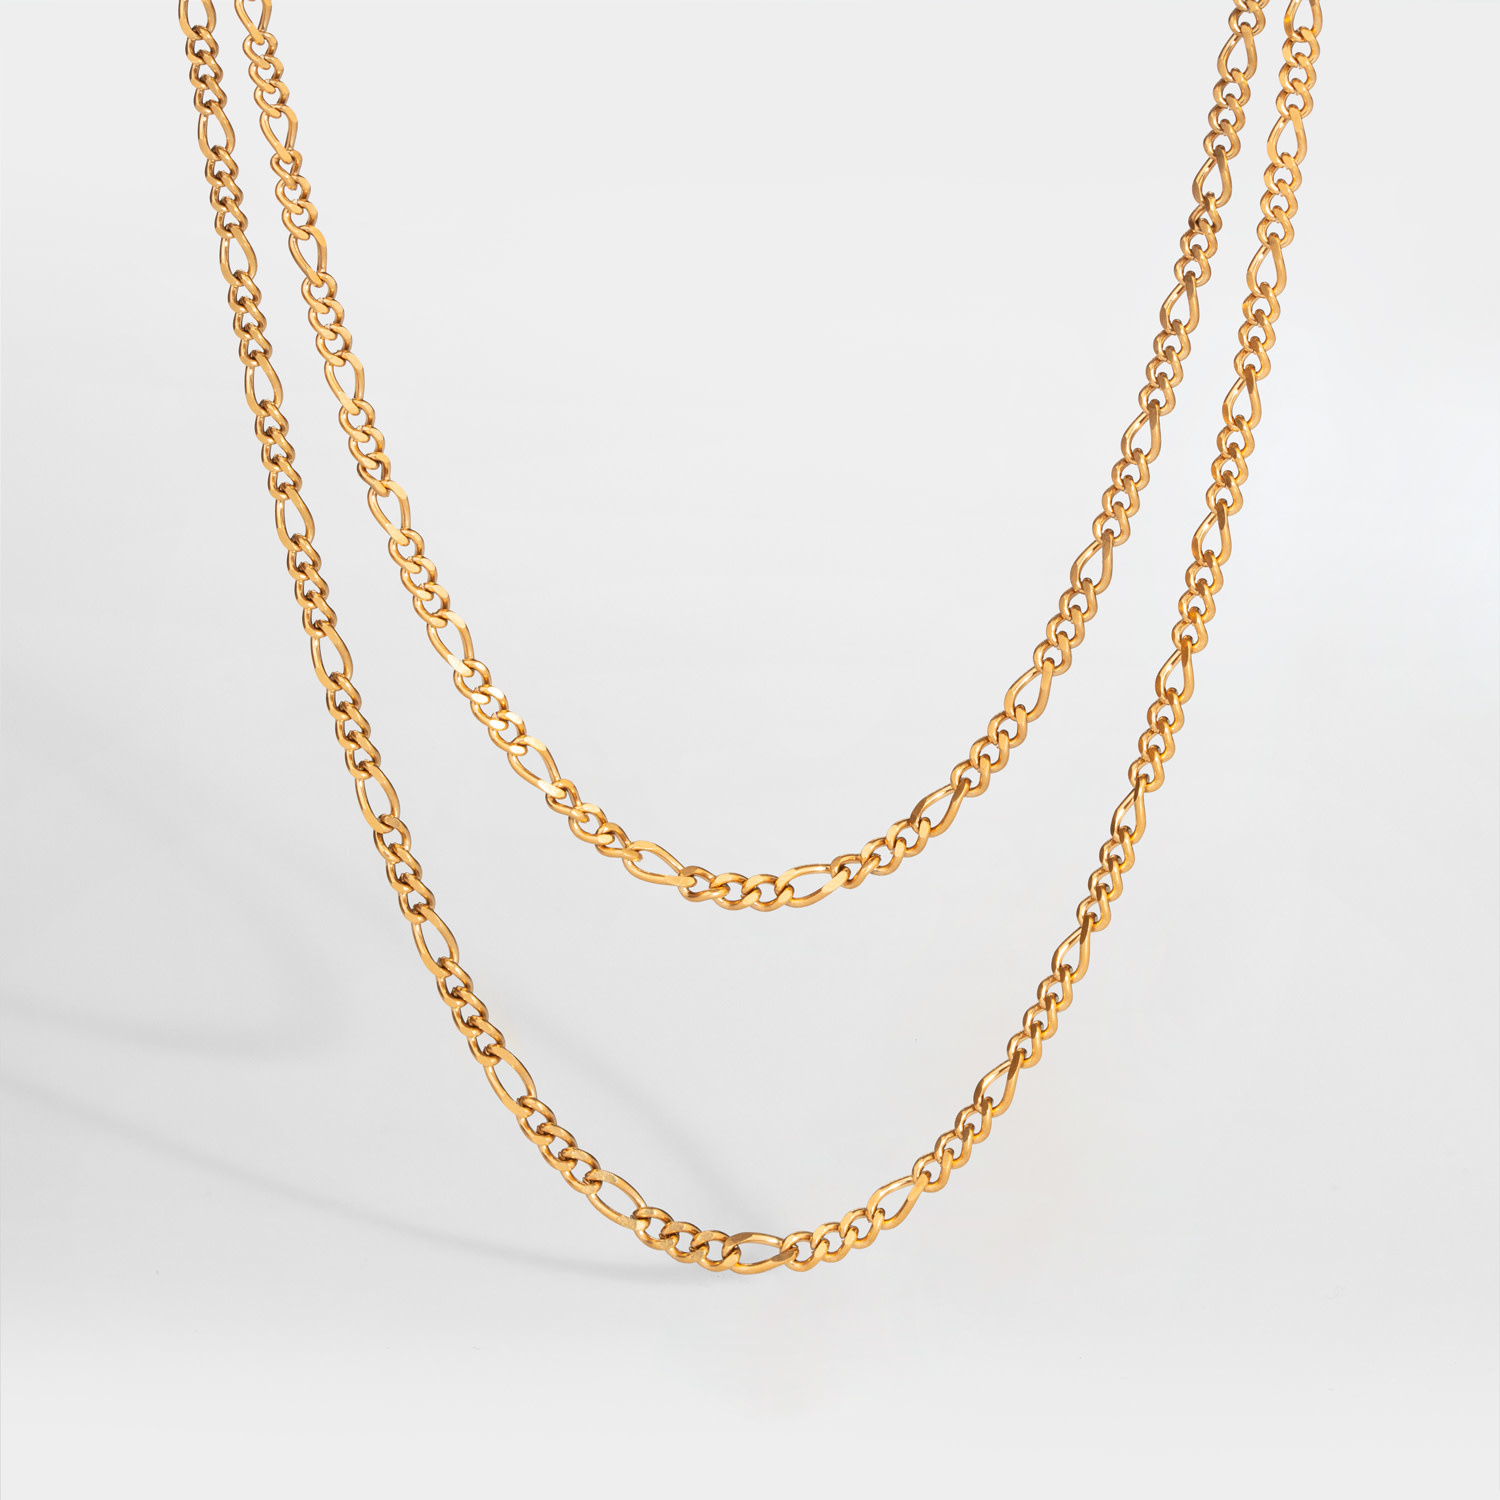 Northern Legacy Northern Legacy Double Antique Chain Gold Tone